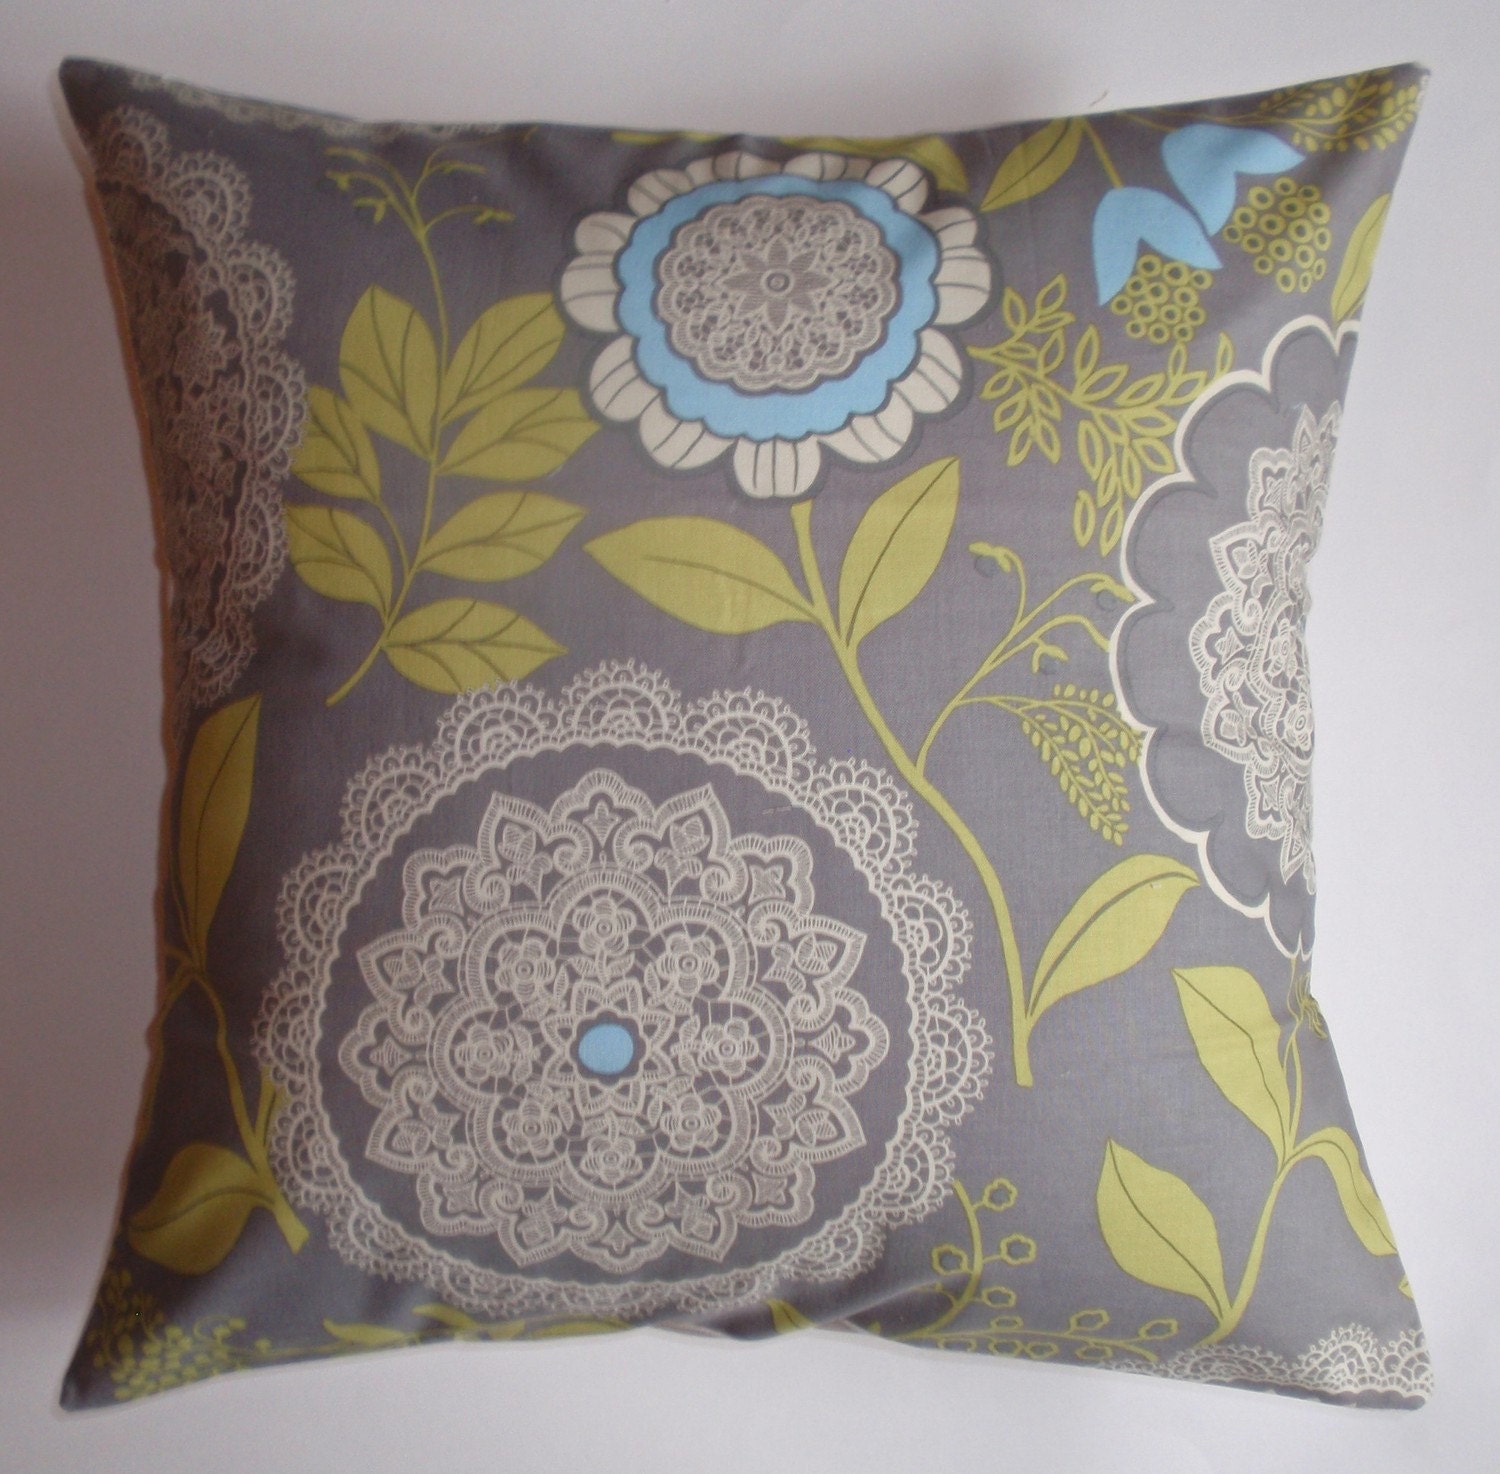 Throw Pillow 16X16 Removable cover sewn with Amy Butler's Lacework in Gray